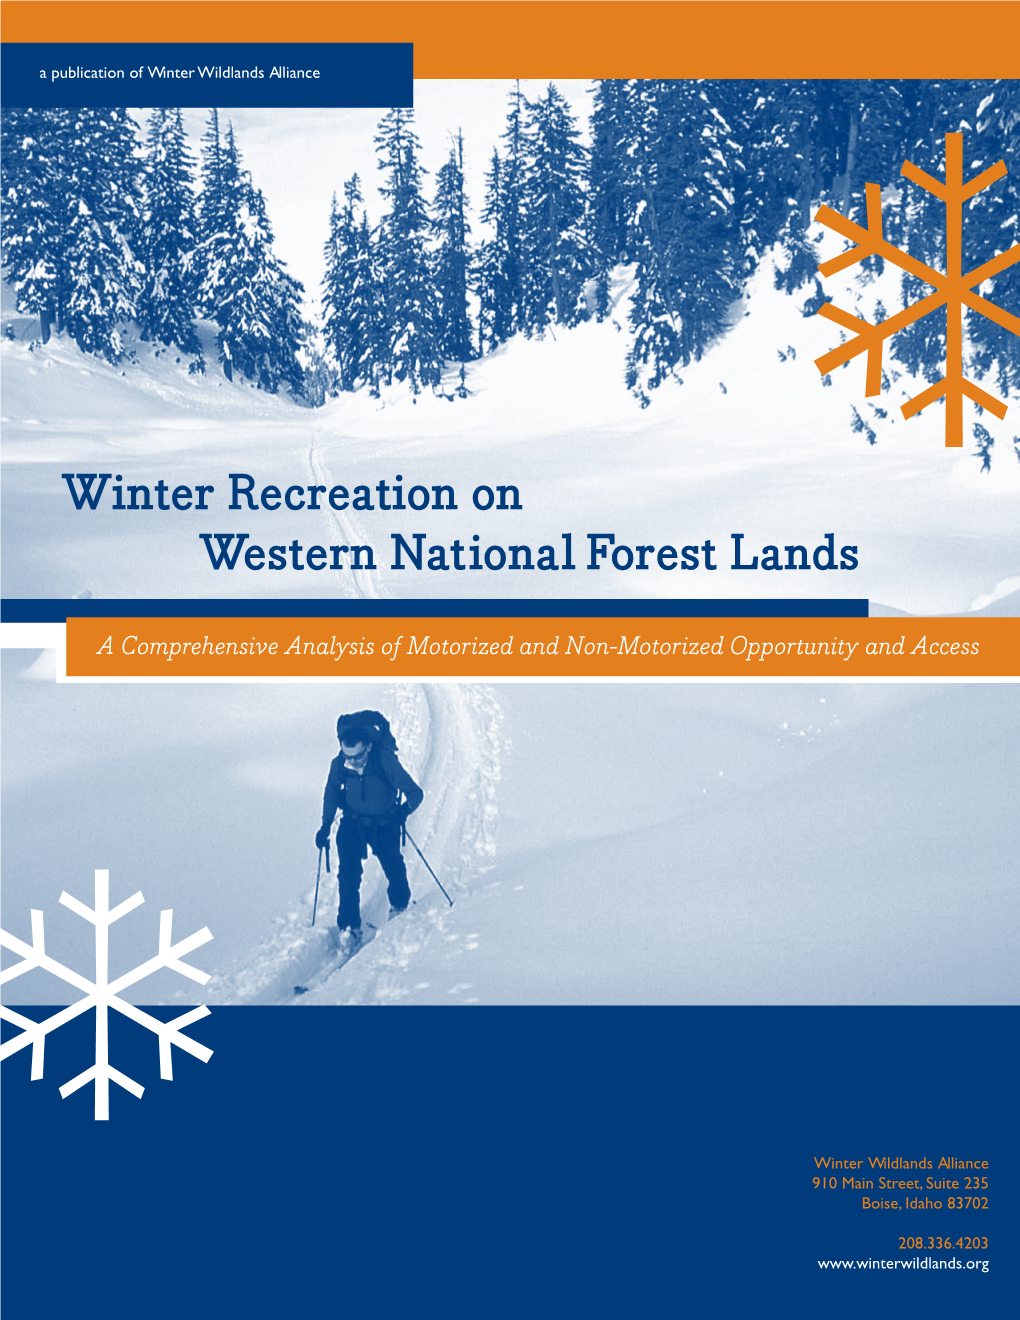 Winter Recreation on Western National Forest Lands